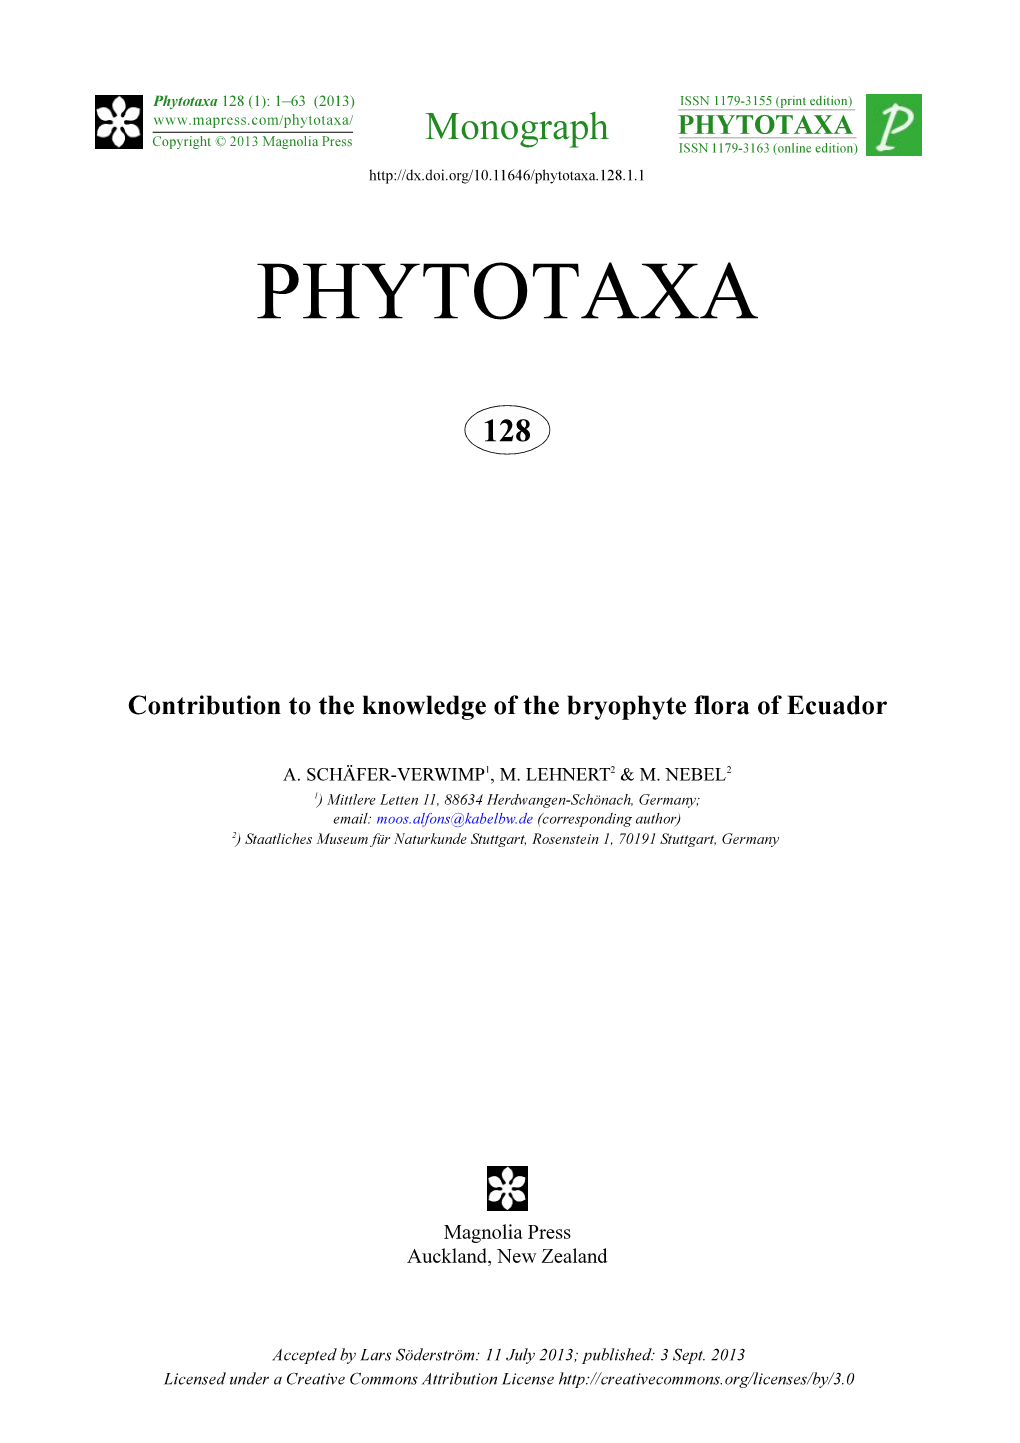 Contribution to the Knowledge of the Bryophyte Flora of Ecuador